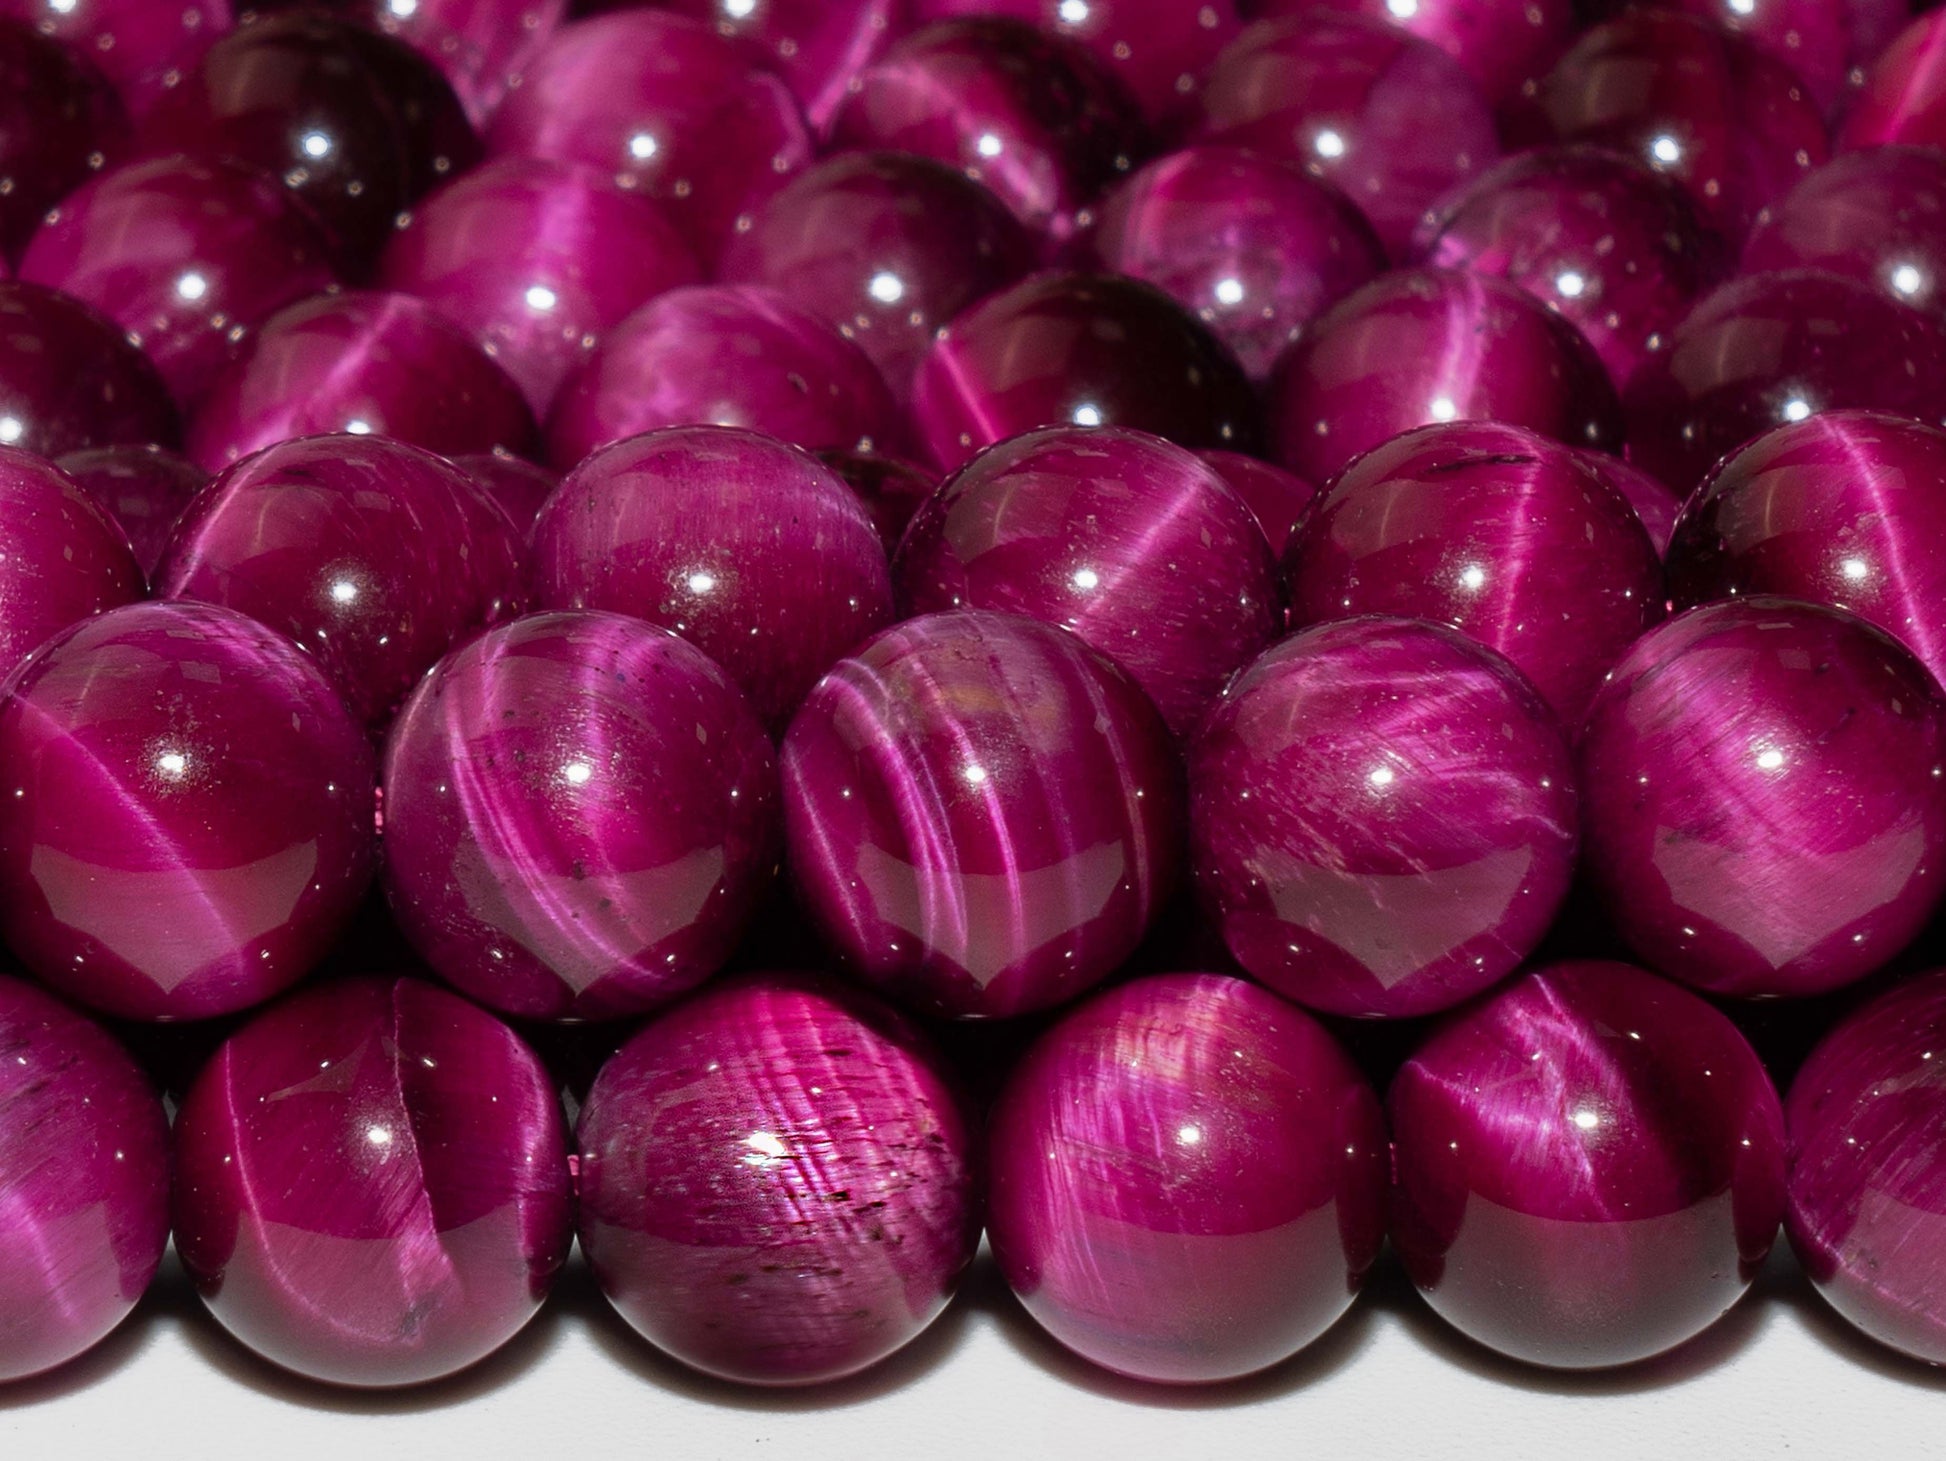 Natural Stone Rose Red Tiger Eye Beads Gemstone Loose Beads Round Shape Size Options 4/6/8/10/12mmfor Jewelry Making